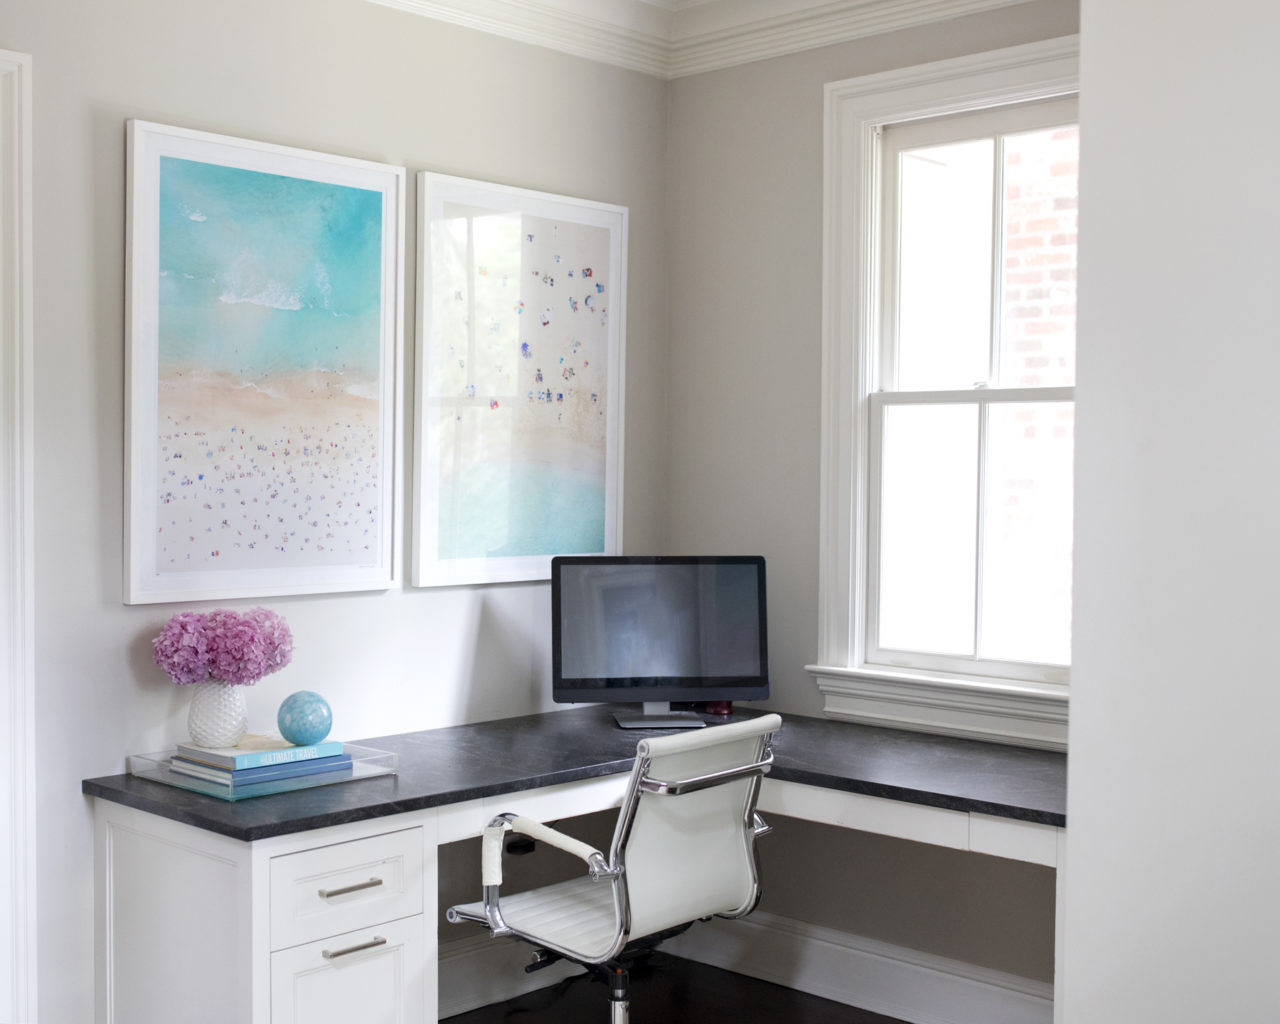 10 Pro Designer Tips to Create an Inviting Home Office Space. Details on The Pillow Goddess blog!